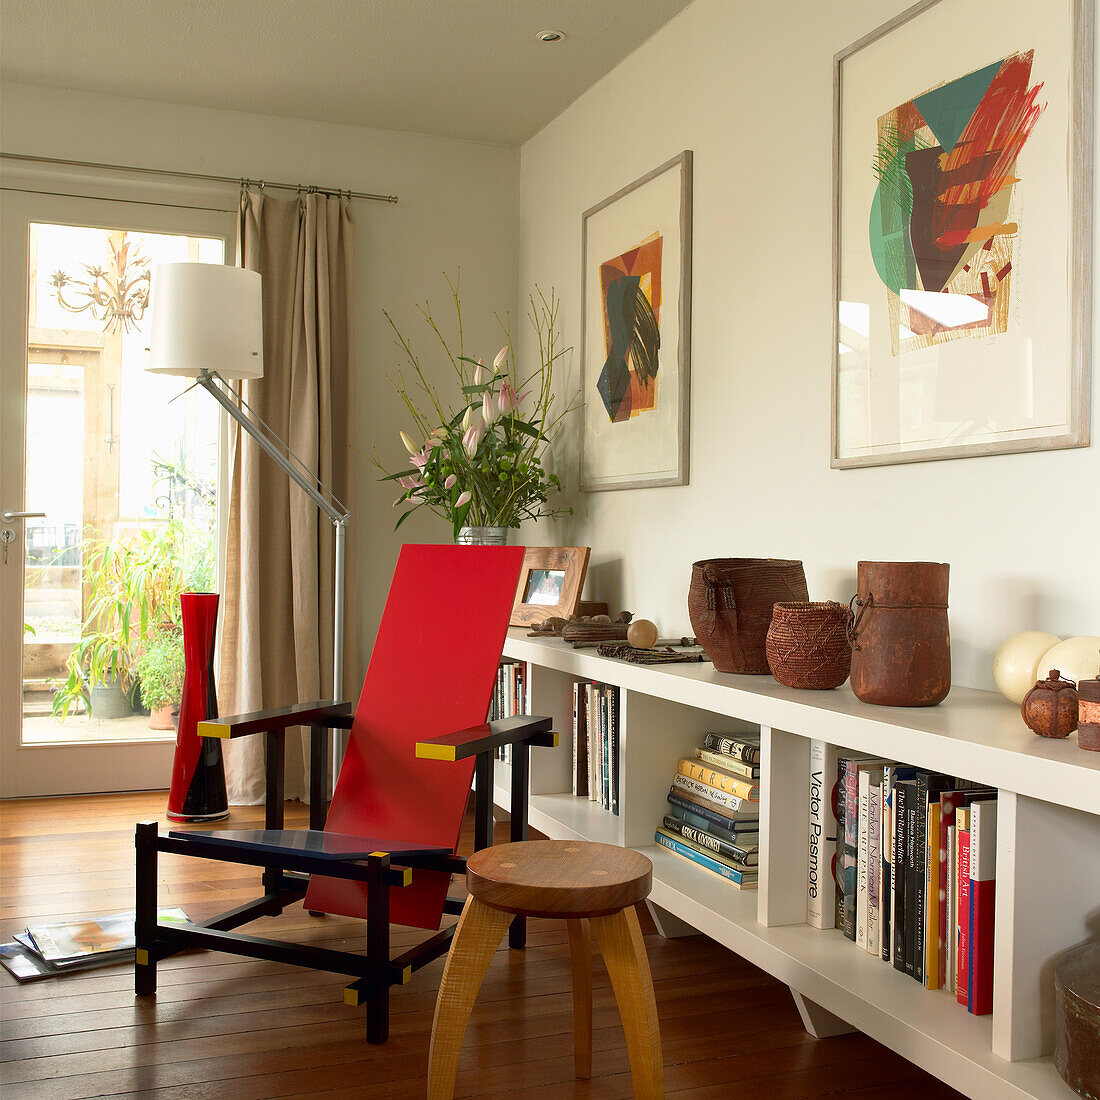 Reading corner with red designer armchair and bookshelf in the modern living room